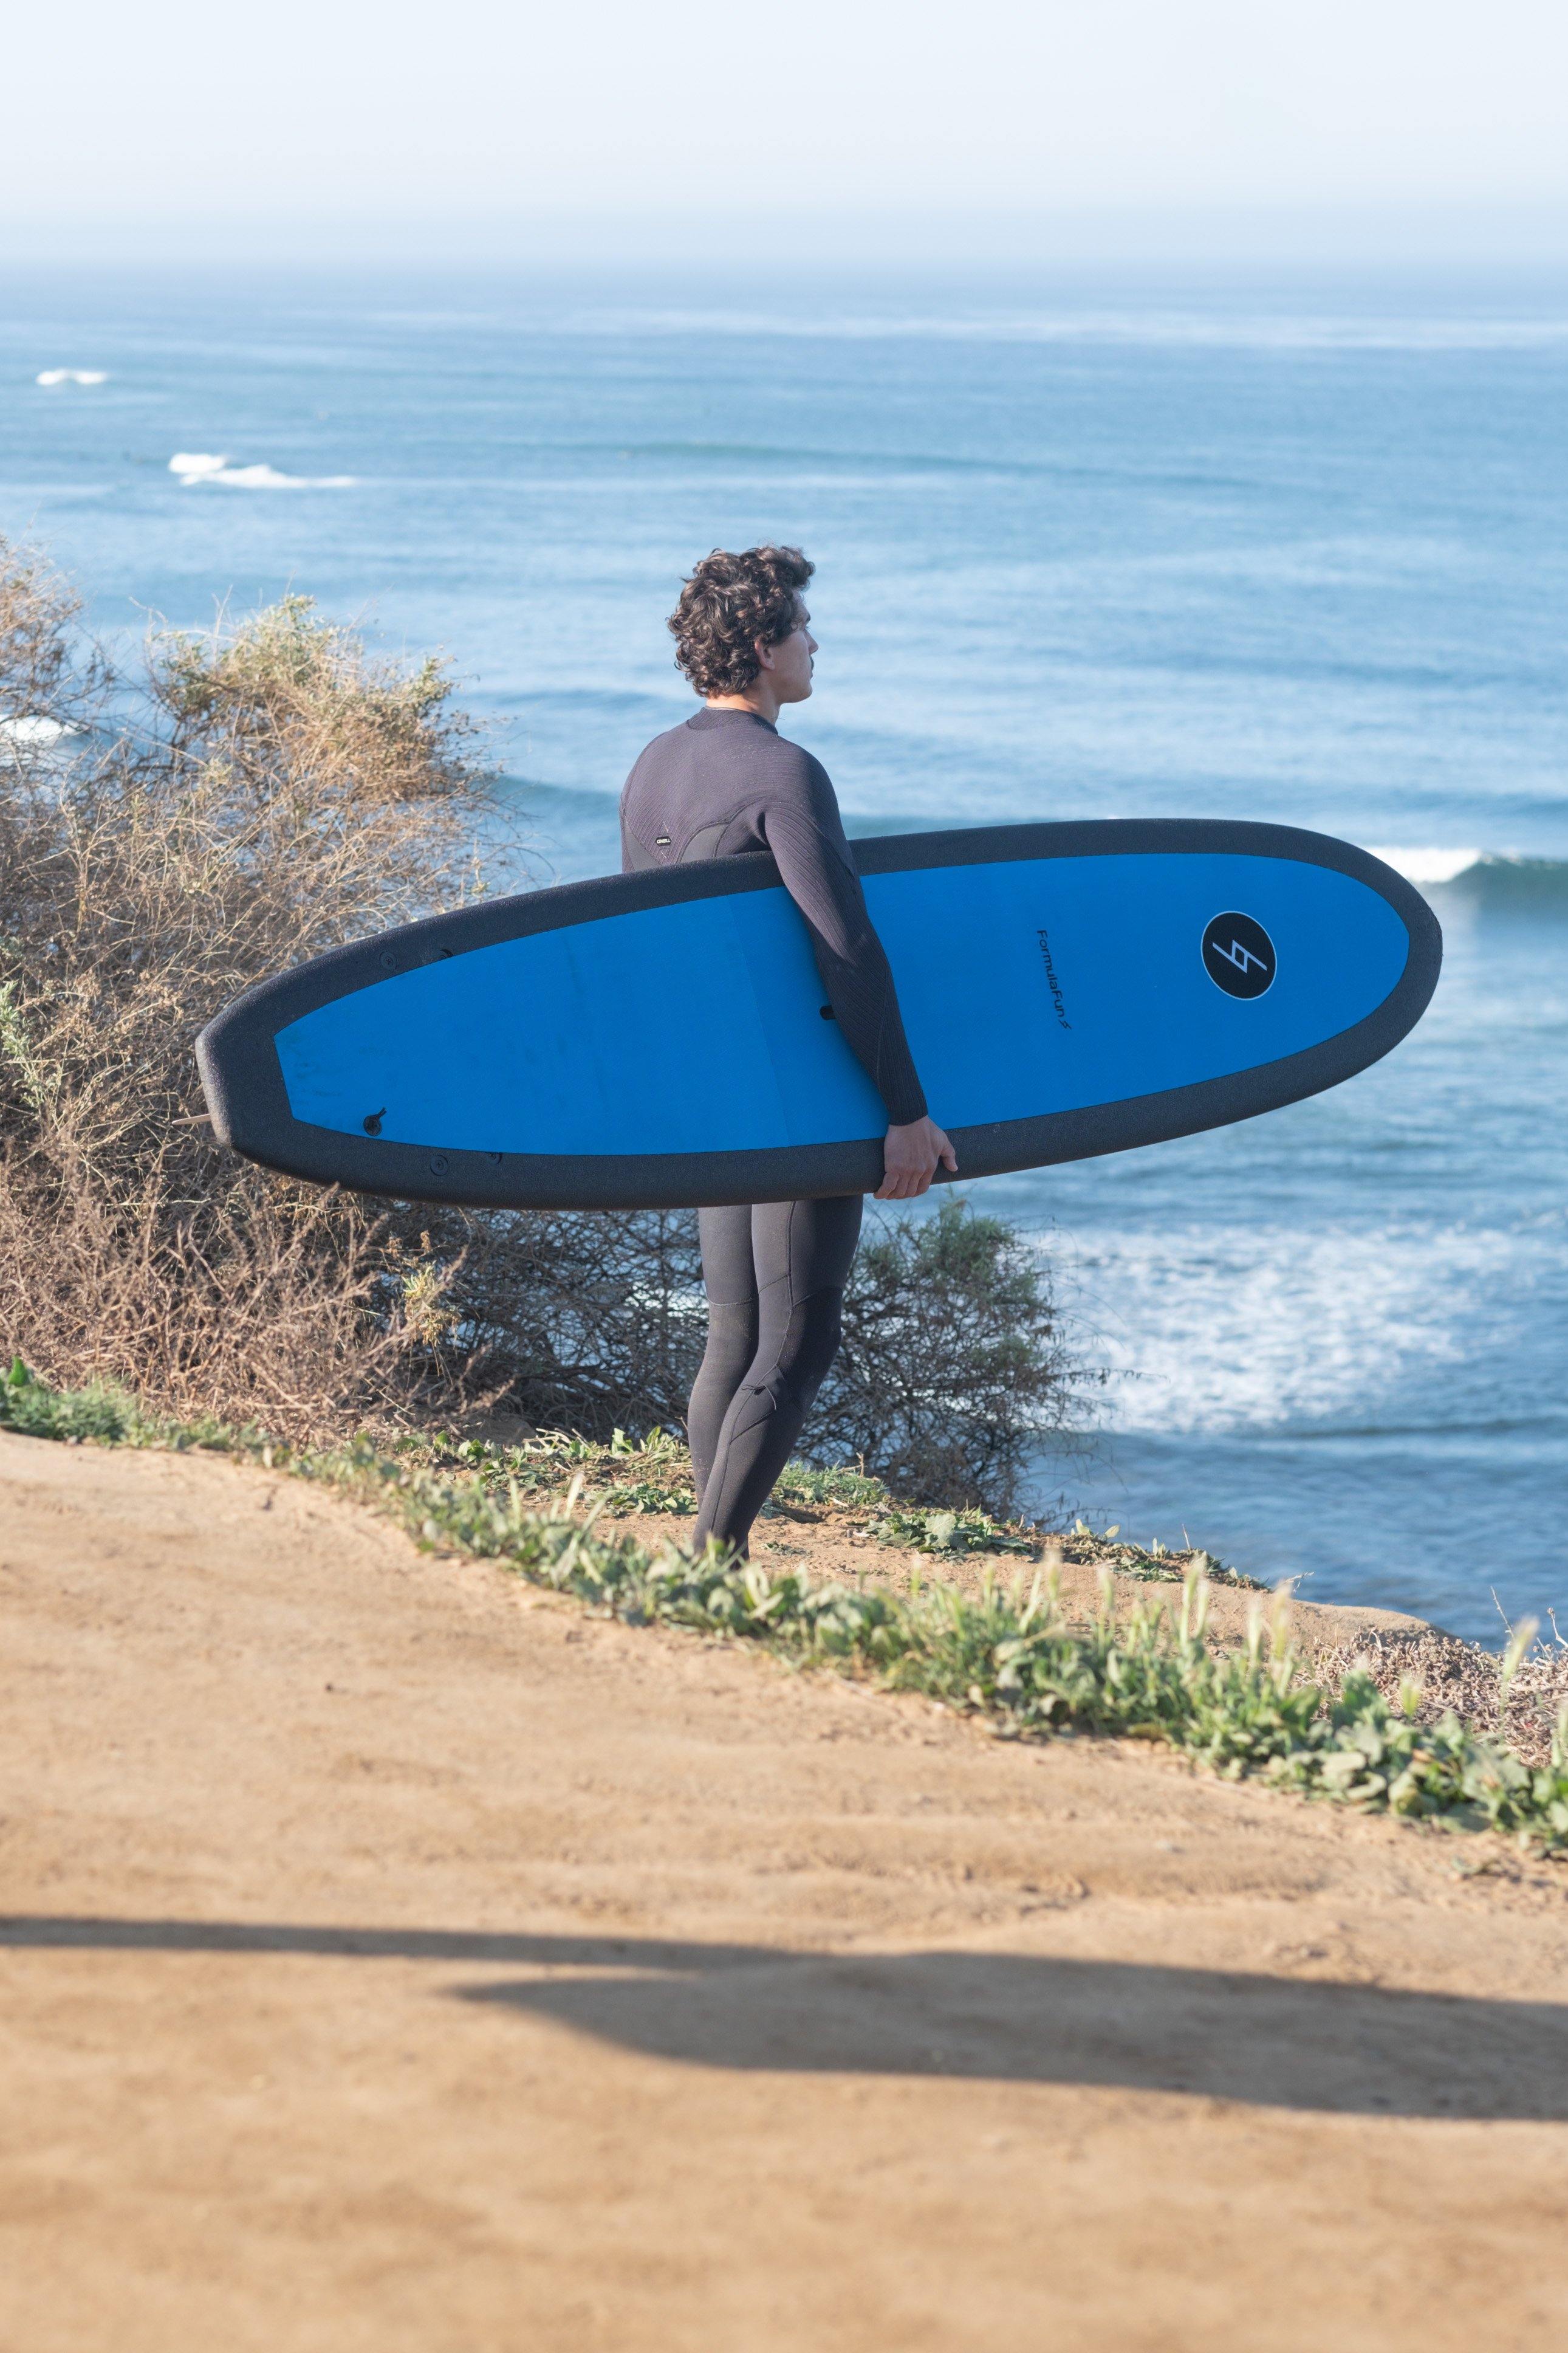 A man on a beach looking at the ocean with a blue 7 foot 10 inch Formula Fun Foamies DOHO surfboard